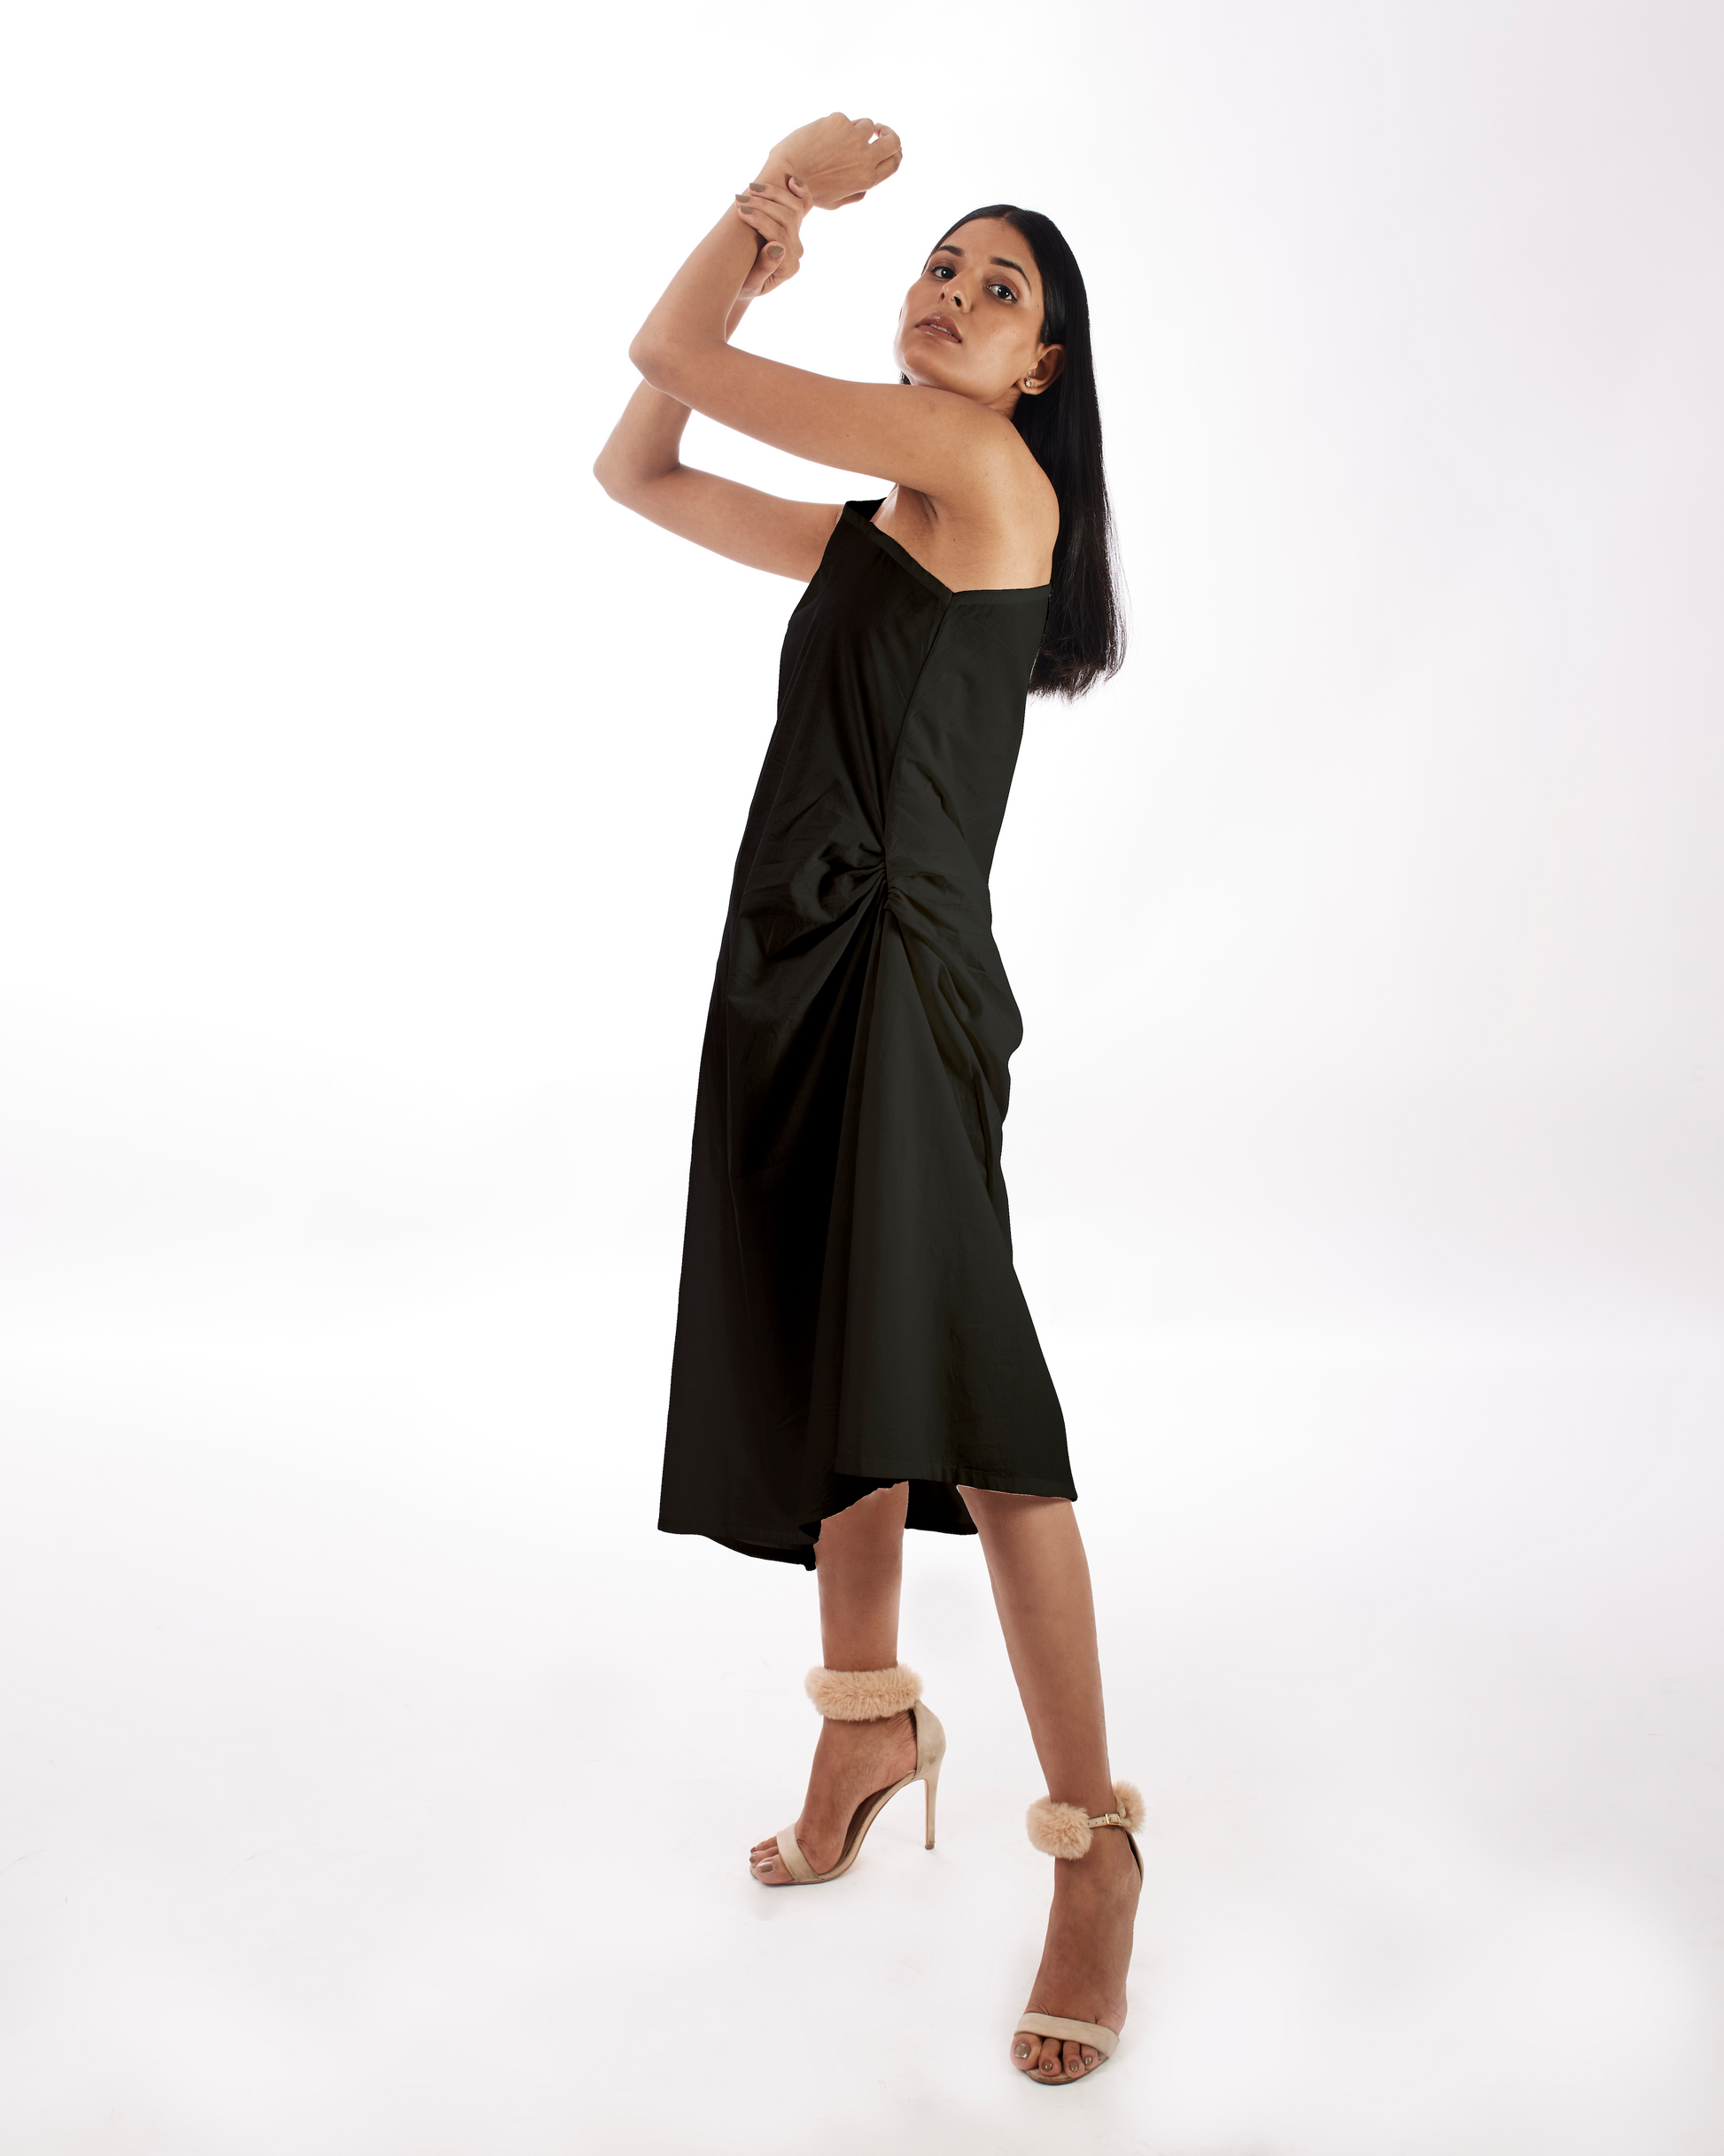 Black One Shoulder Dress at Kamakhyaa by Kamakhyaa. This item is 100% pure cotton, Black, Evening Wear, FB ADS JUNE, KKYSS, Natural, One Shoulder Dresses, Regular Fit, Solids, Summer Sutra, Womenswear